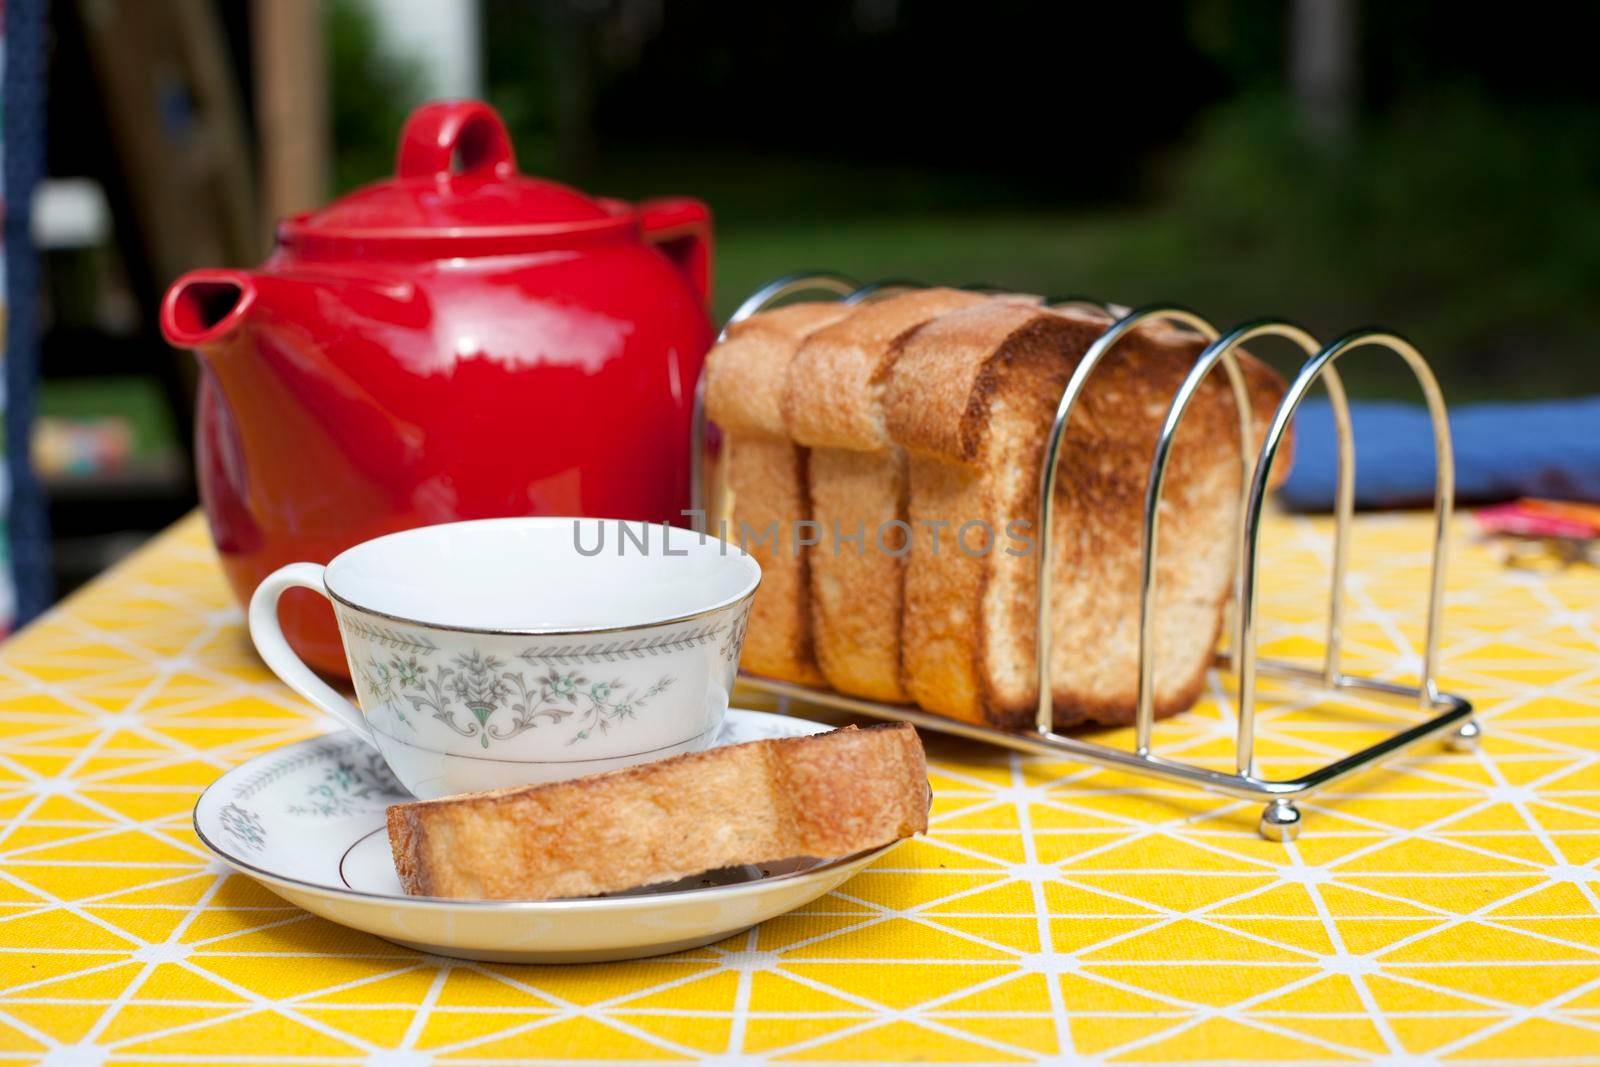 Delicious looking setup with teacup and saucer, toast, and a teapot 